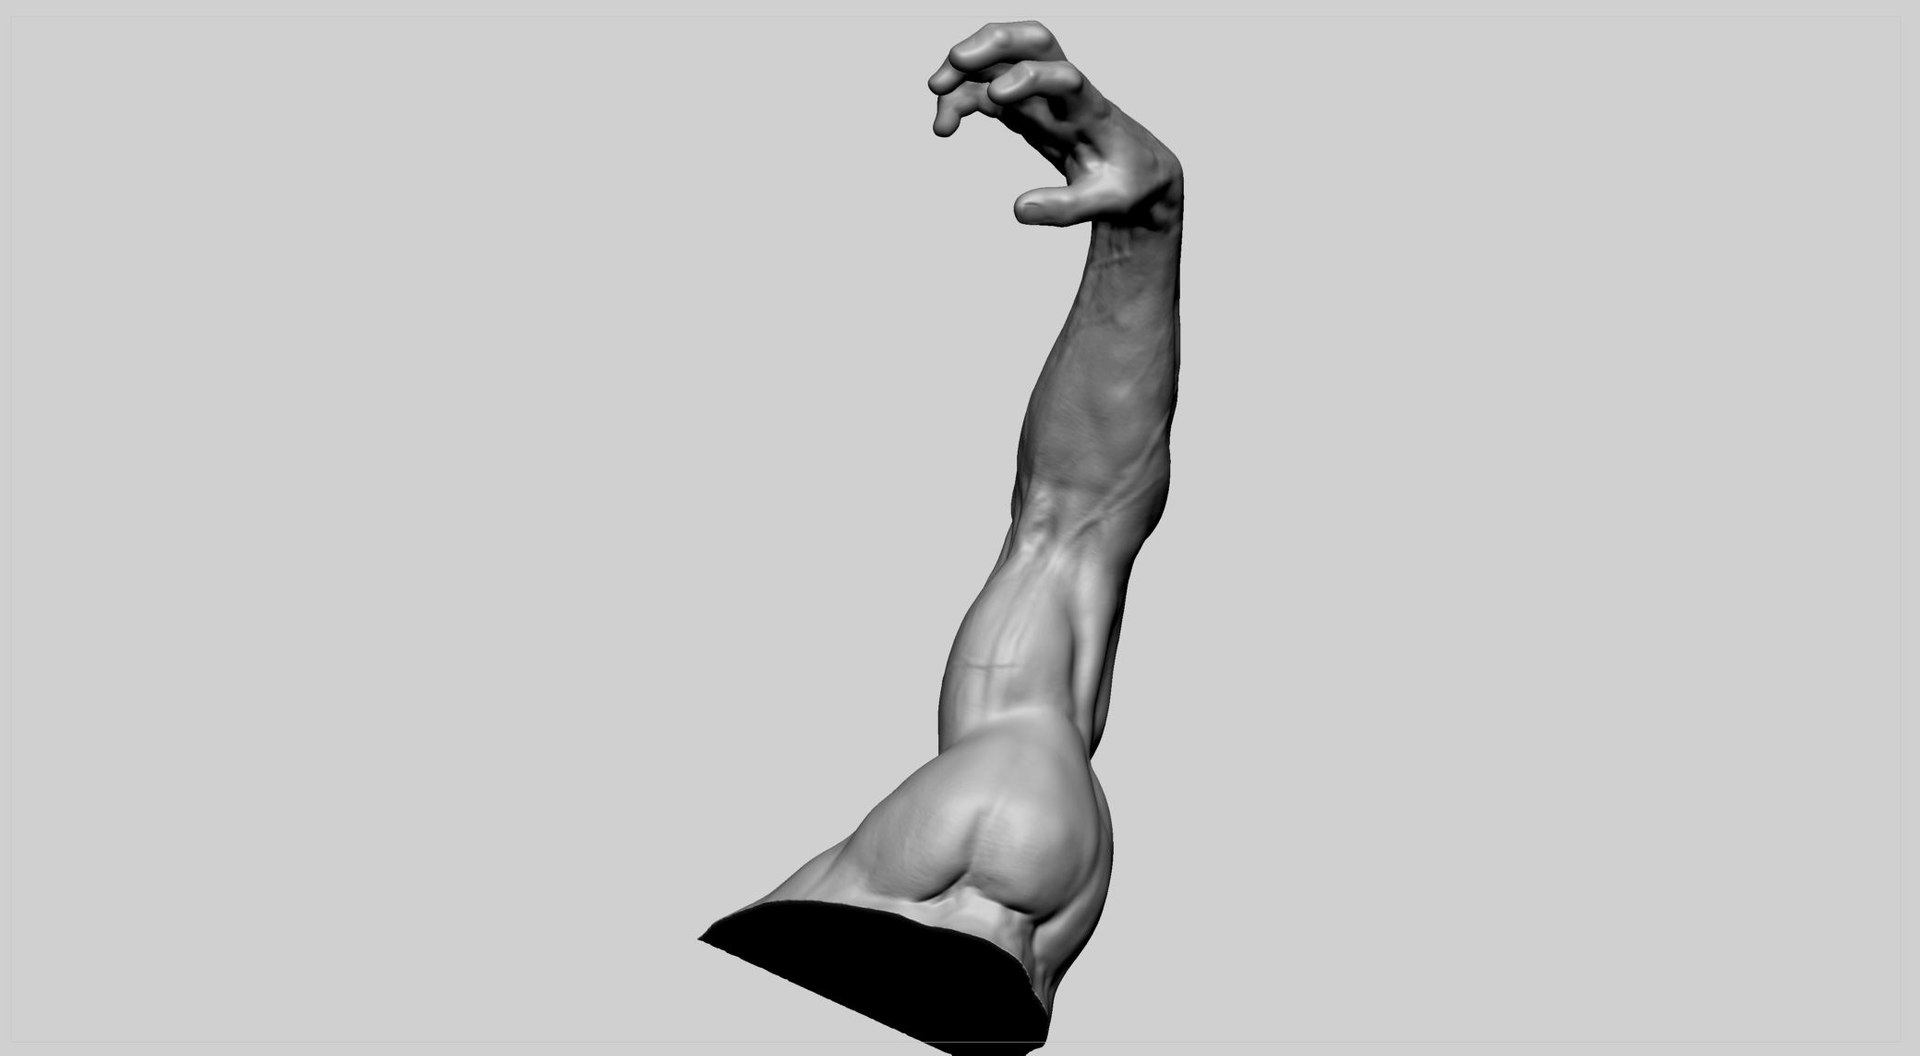 10,979 Ripped Arms Images, Stock Photos, 3D objects, & Vectors